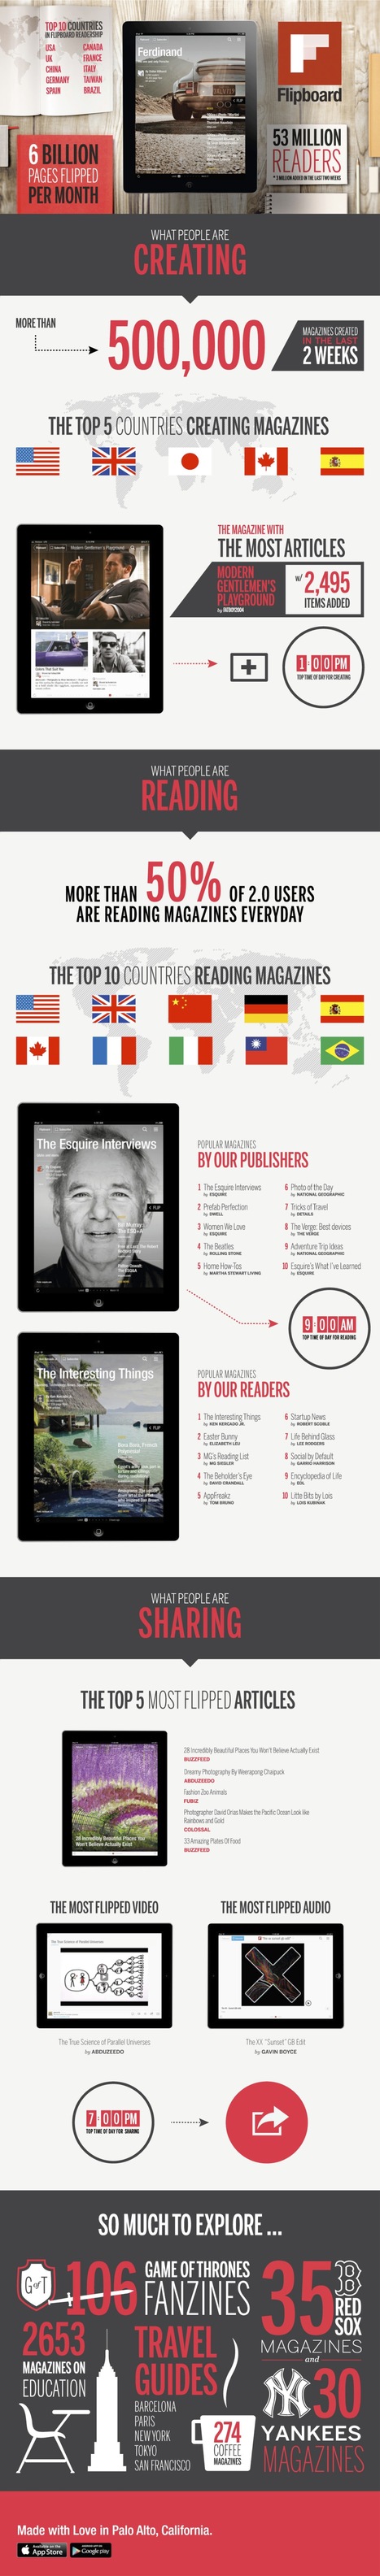 The State of Flipboard and Rise of Mobile Curation [INFOGRAPHIC] | Information Technology & Social Media News | Scoop.it